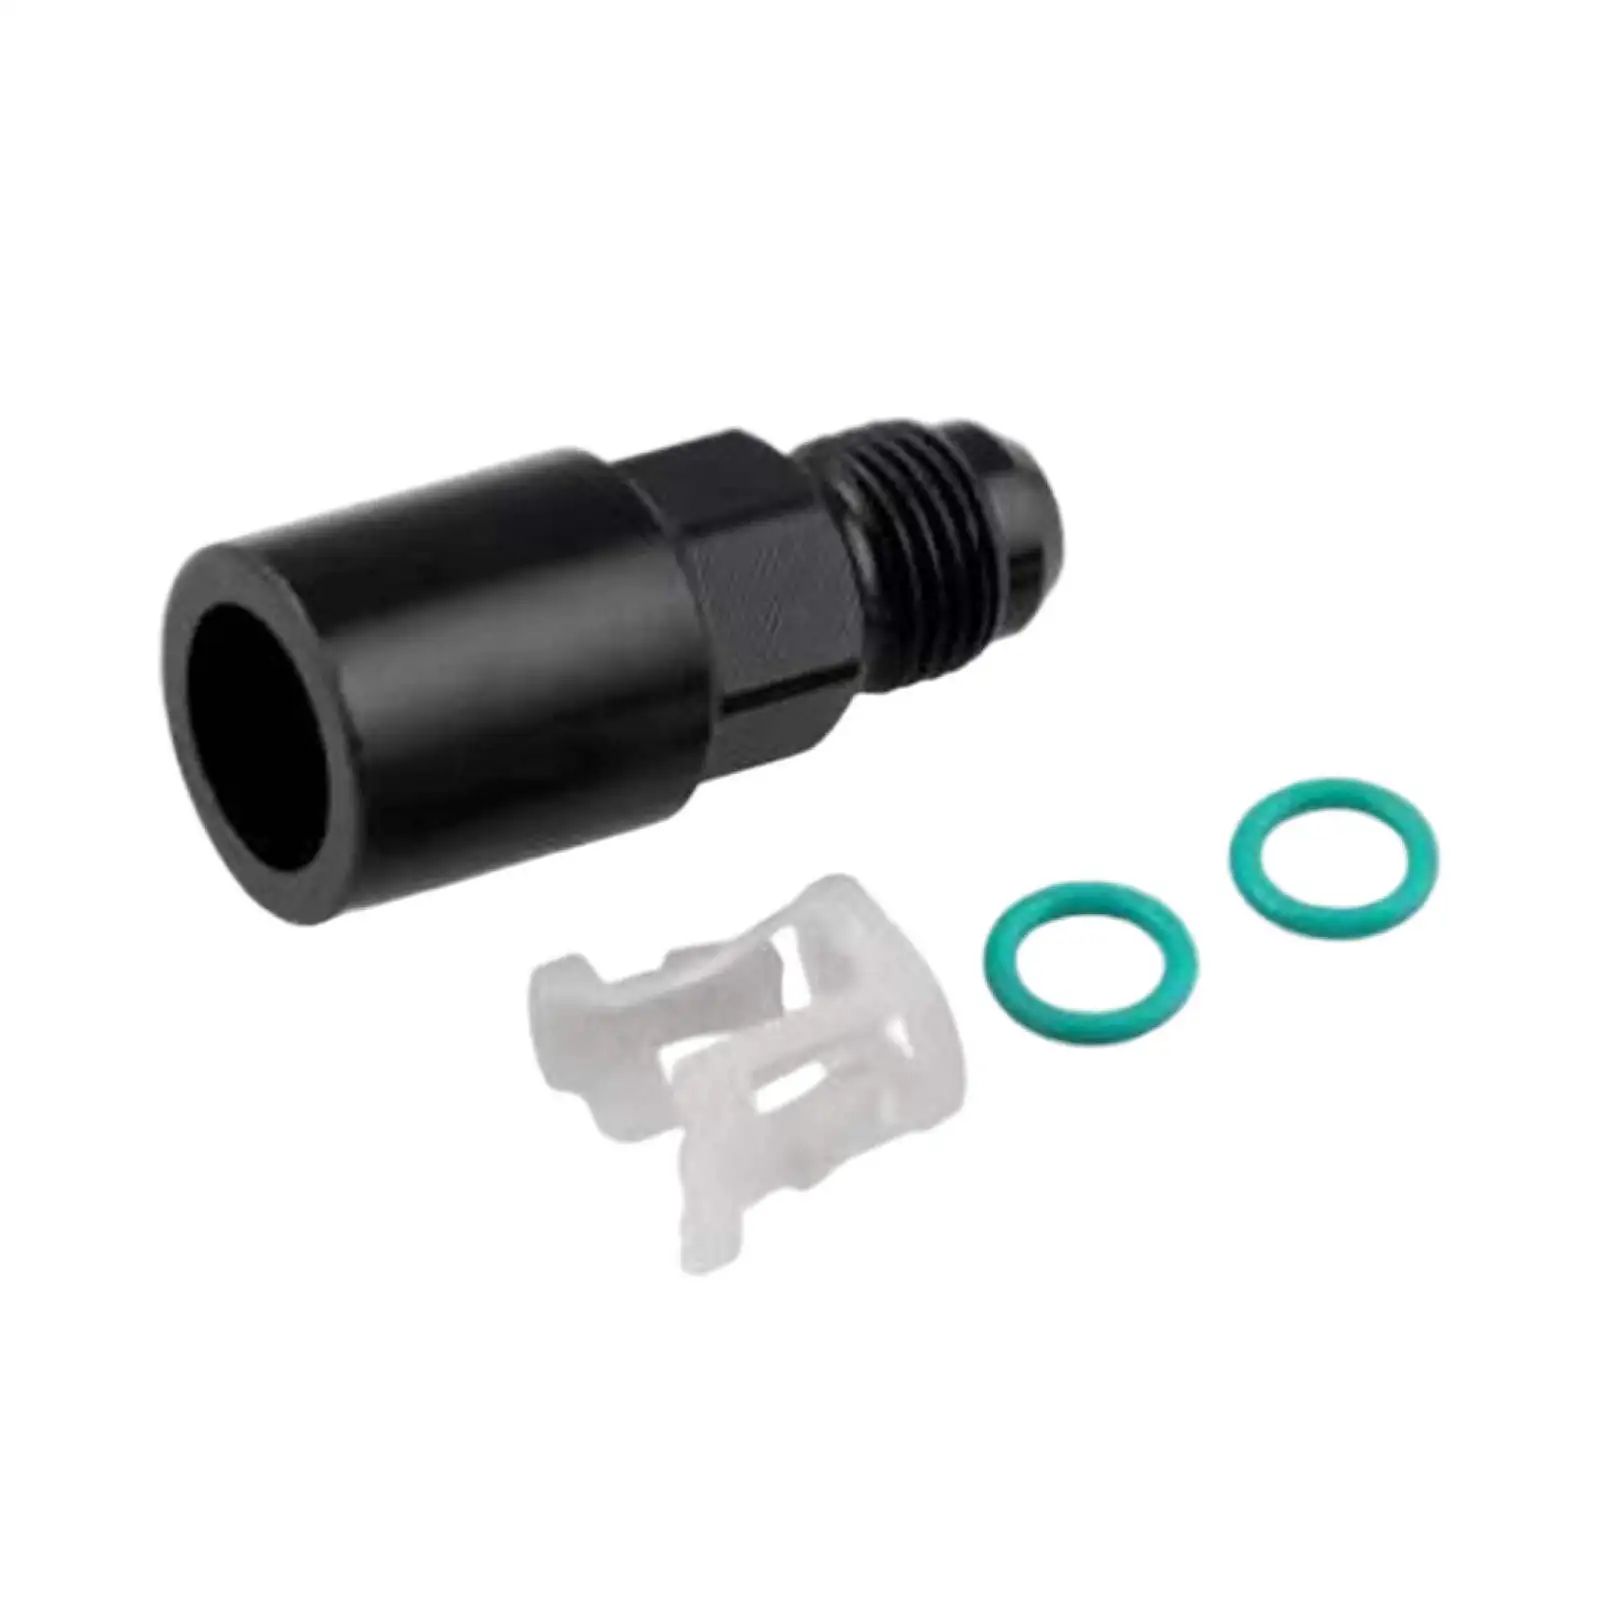 Fuel Adapter Fitting 6AN to 5/16 GM Quick Connect Black Oil Line Swivel Pipe Adapter Fit for Fuel Rail Quick Connect Fitting